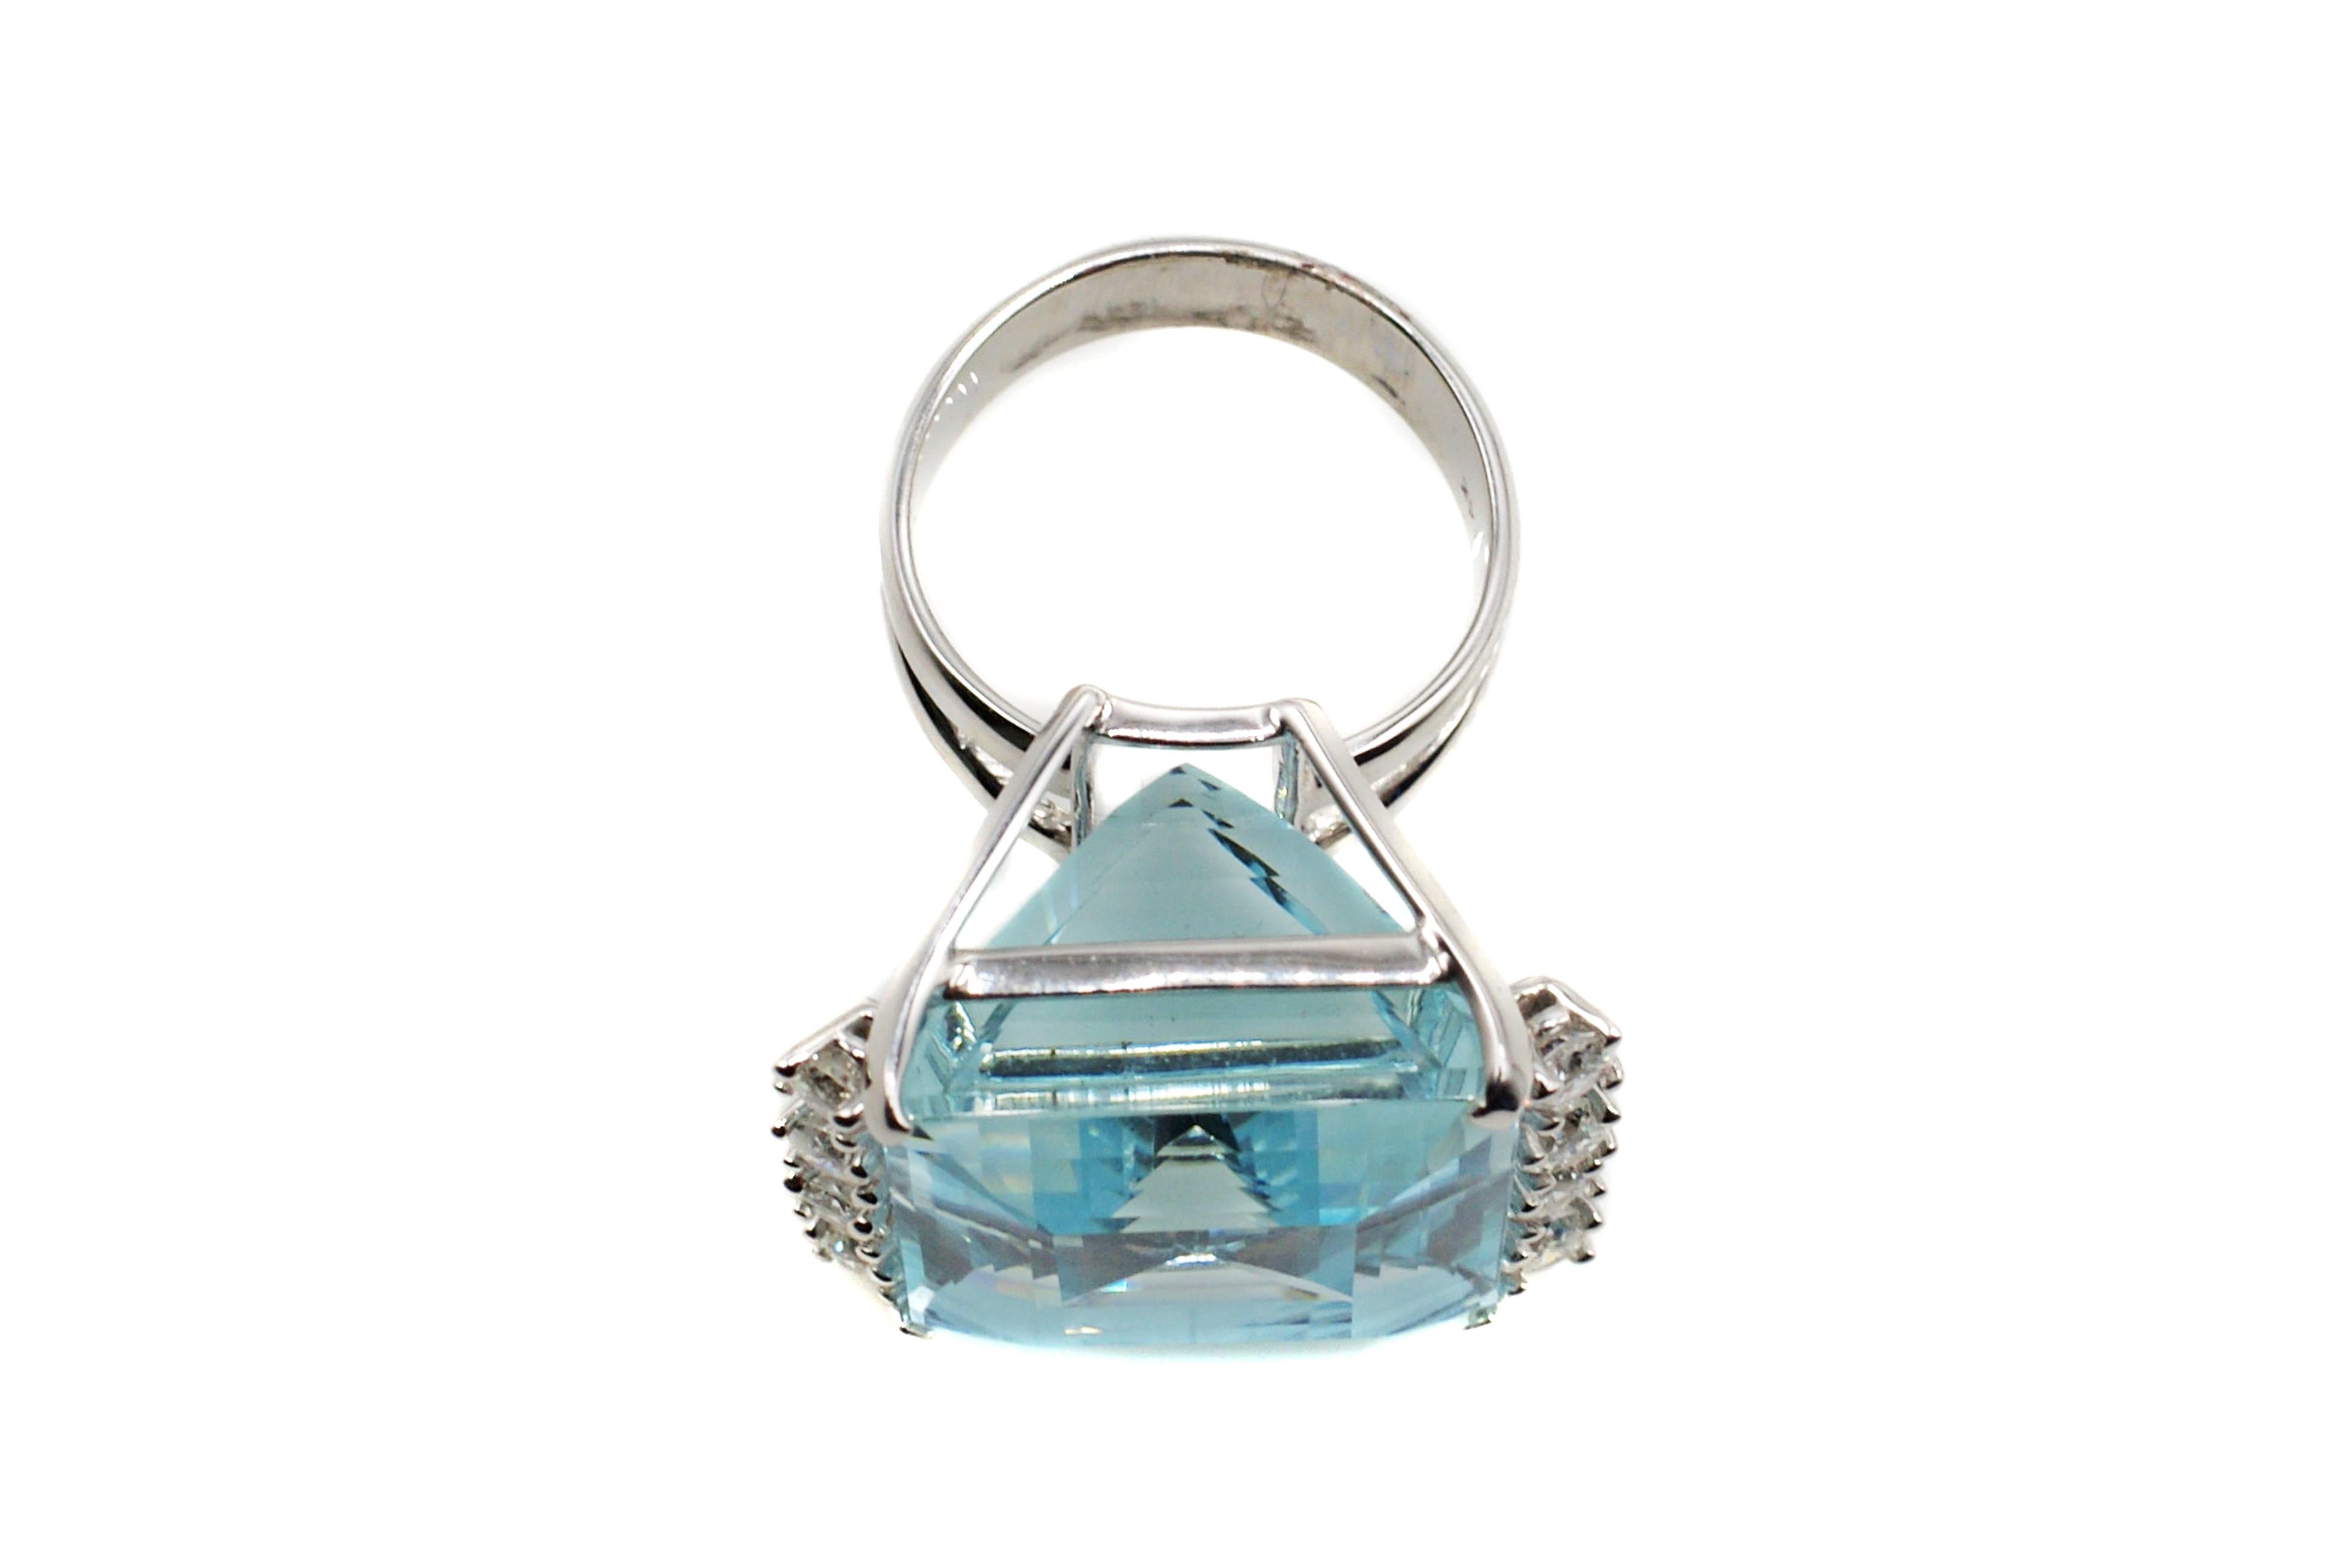 This bold ring shows off a perfectly square step-cut Aquamarine measured to weigh approximately 35 carats. The lively pastel-blue center gem is set with 4 prongs and is embellished by 4 bright white and sparkly brilliant cut diamonds on either side.